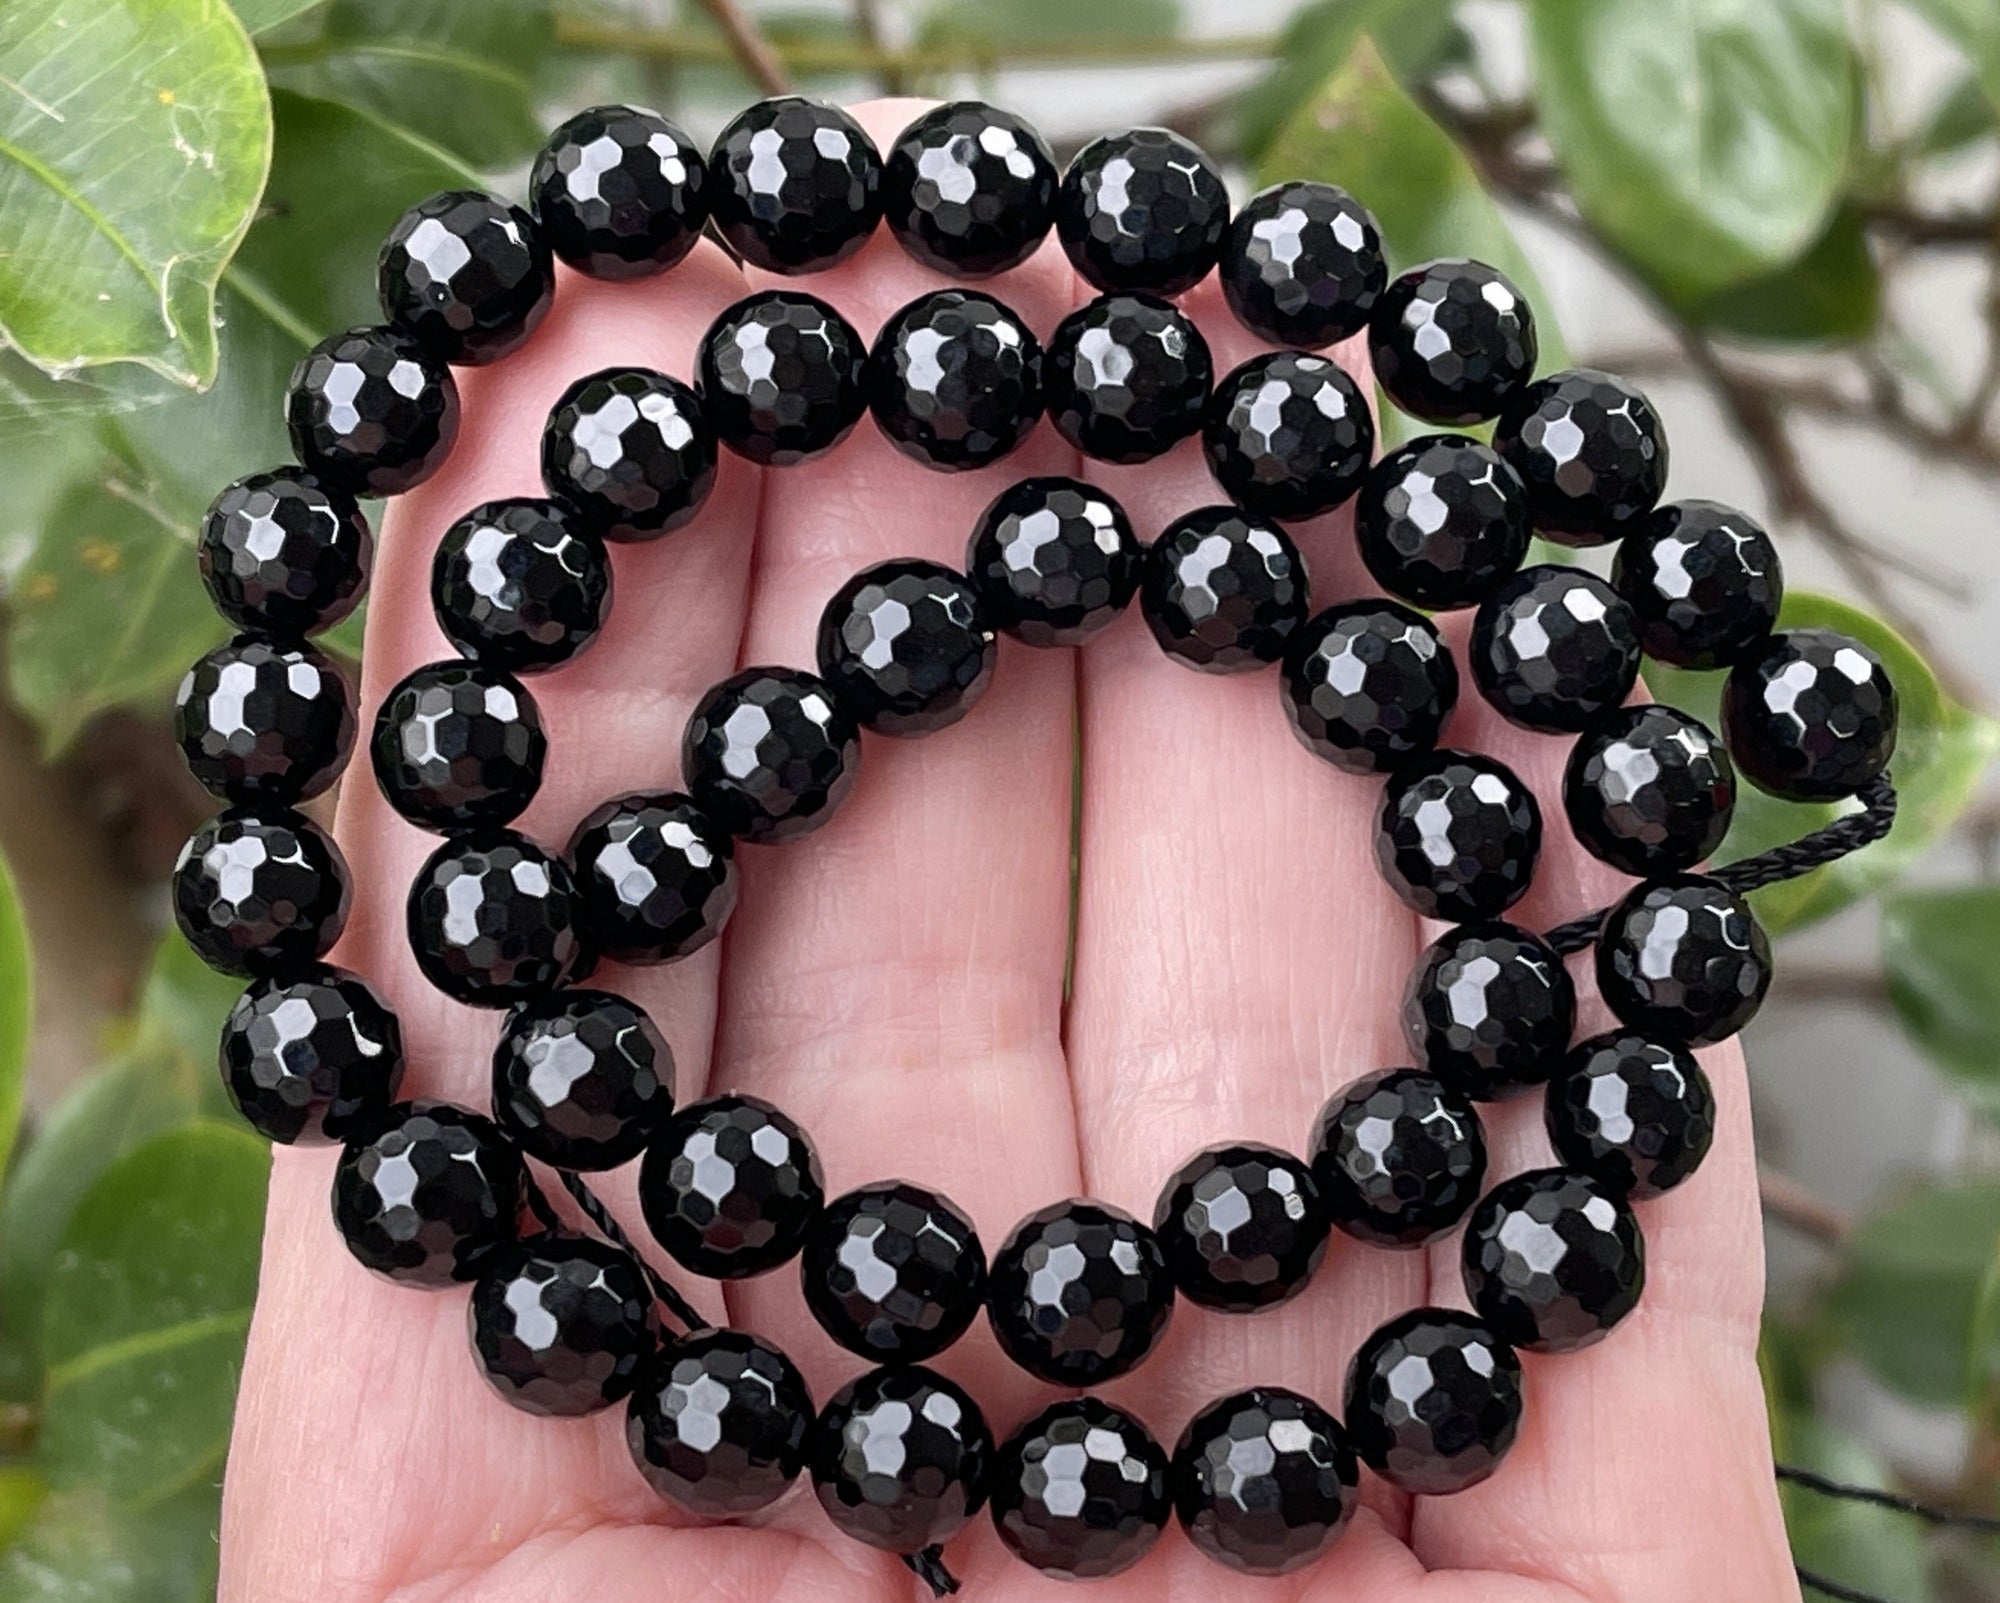 Black Onyx 8mm round micro faceted gemstone beads 15.5" strand